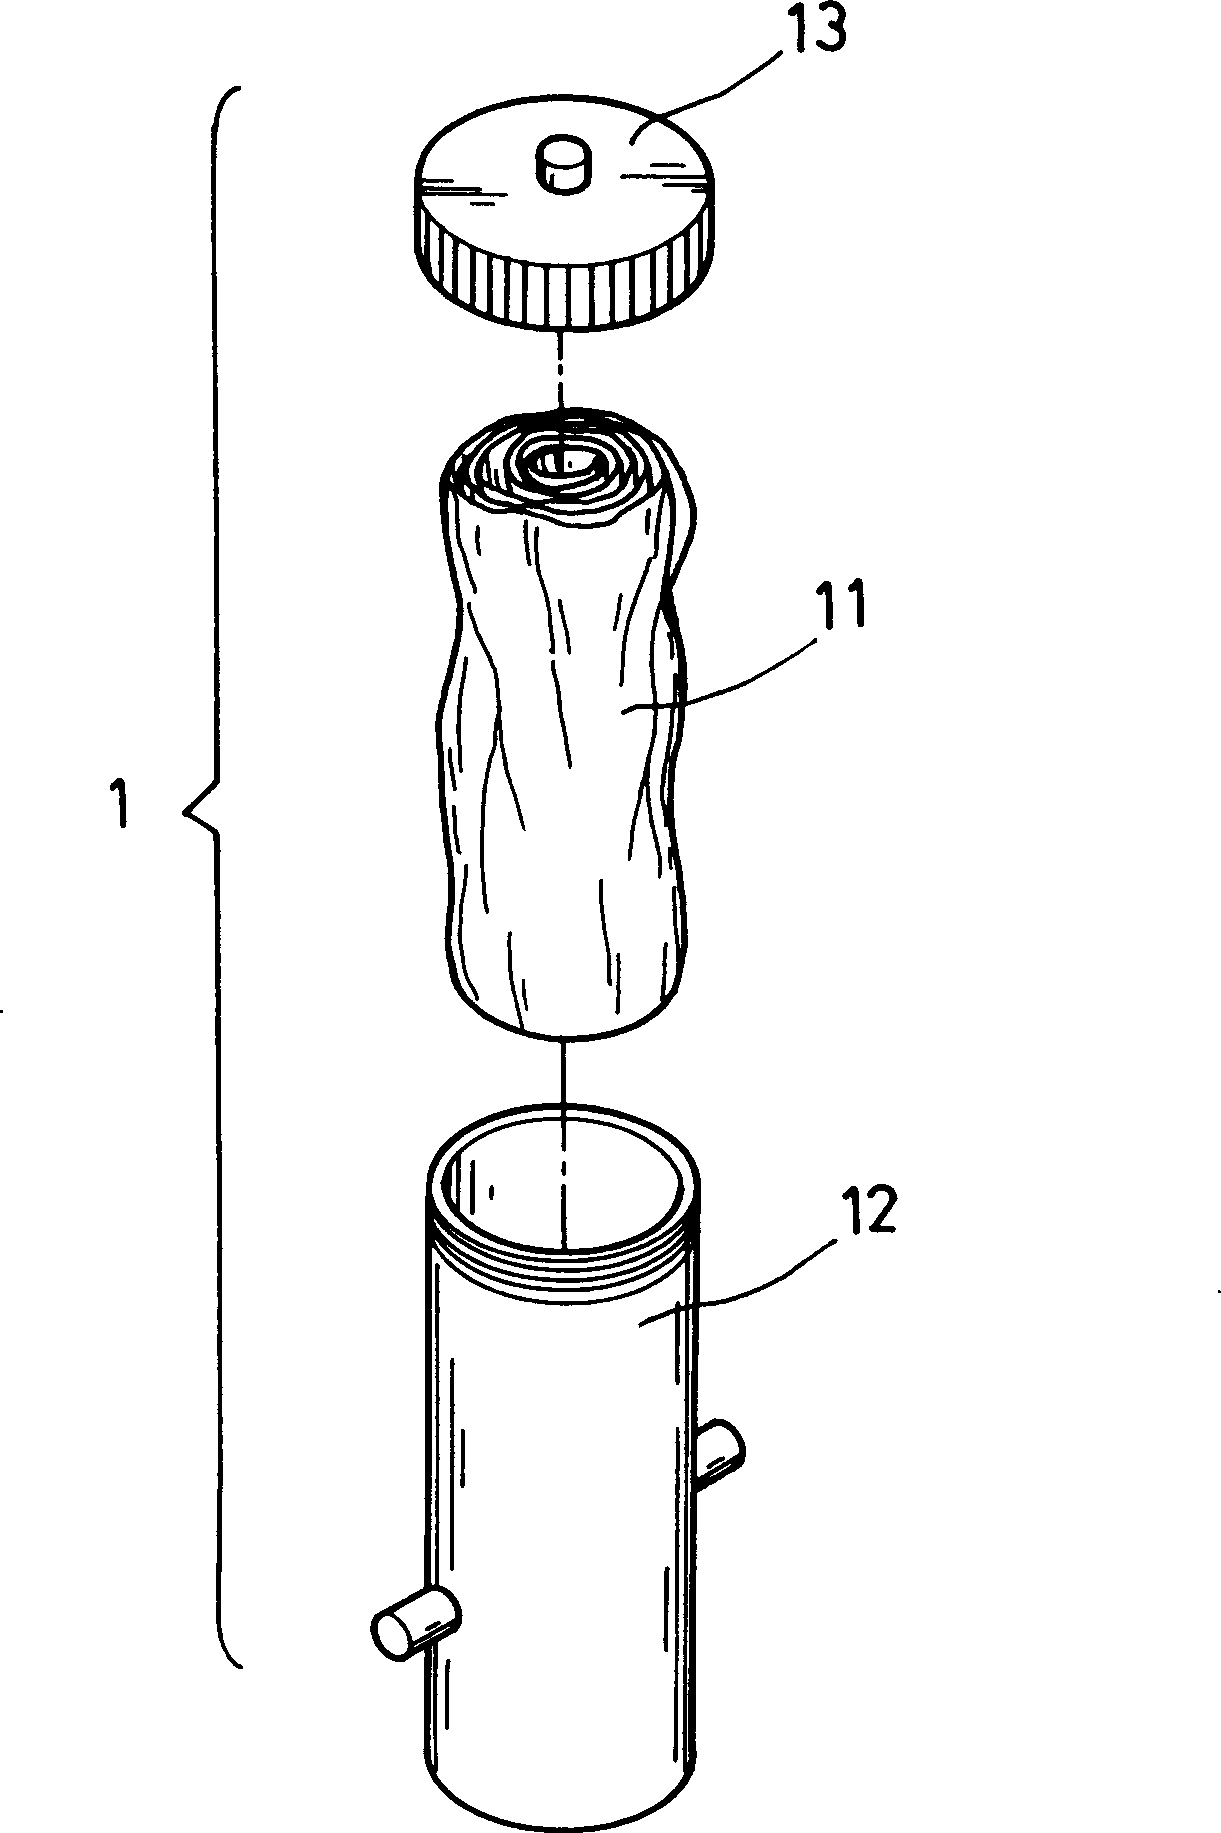 Method and apparatus for dyeing and sampling soft bag